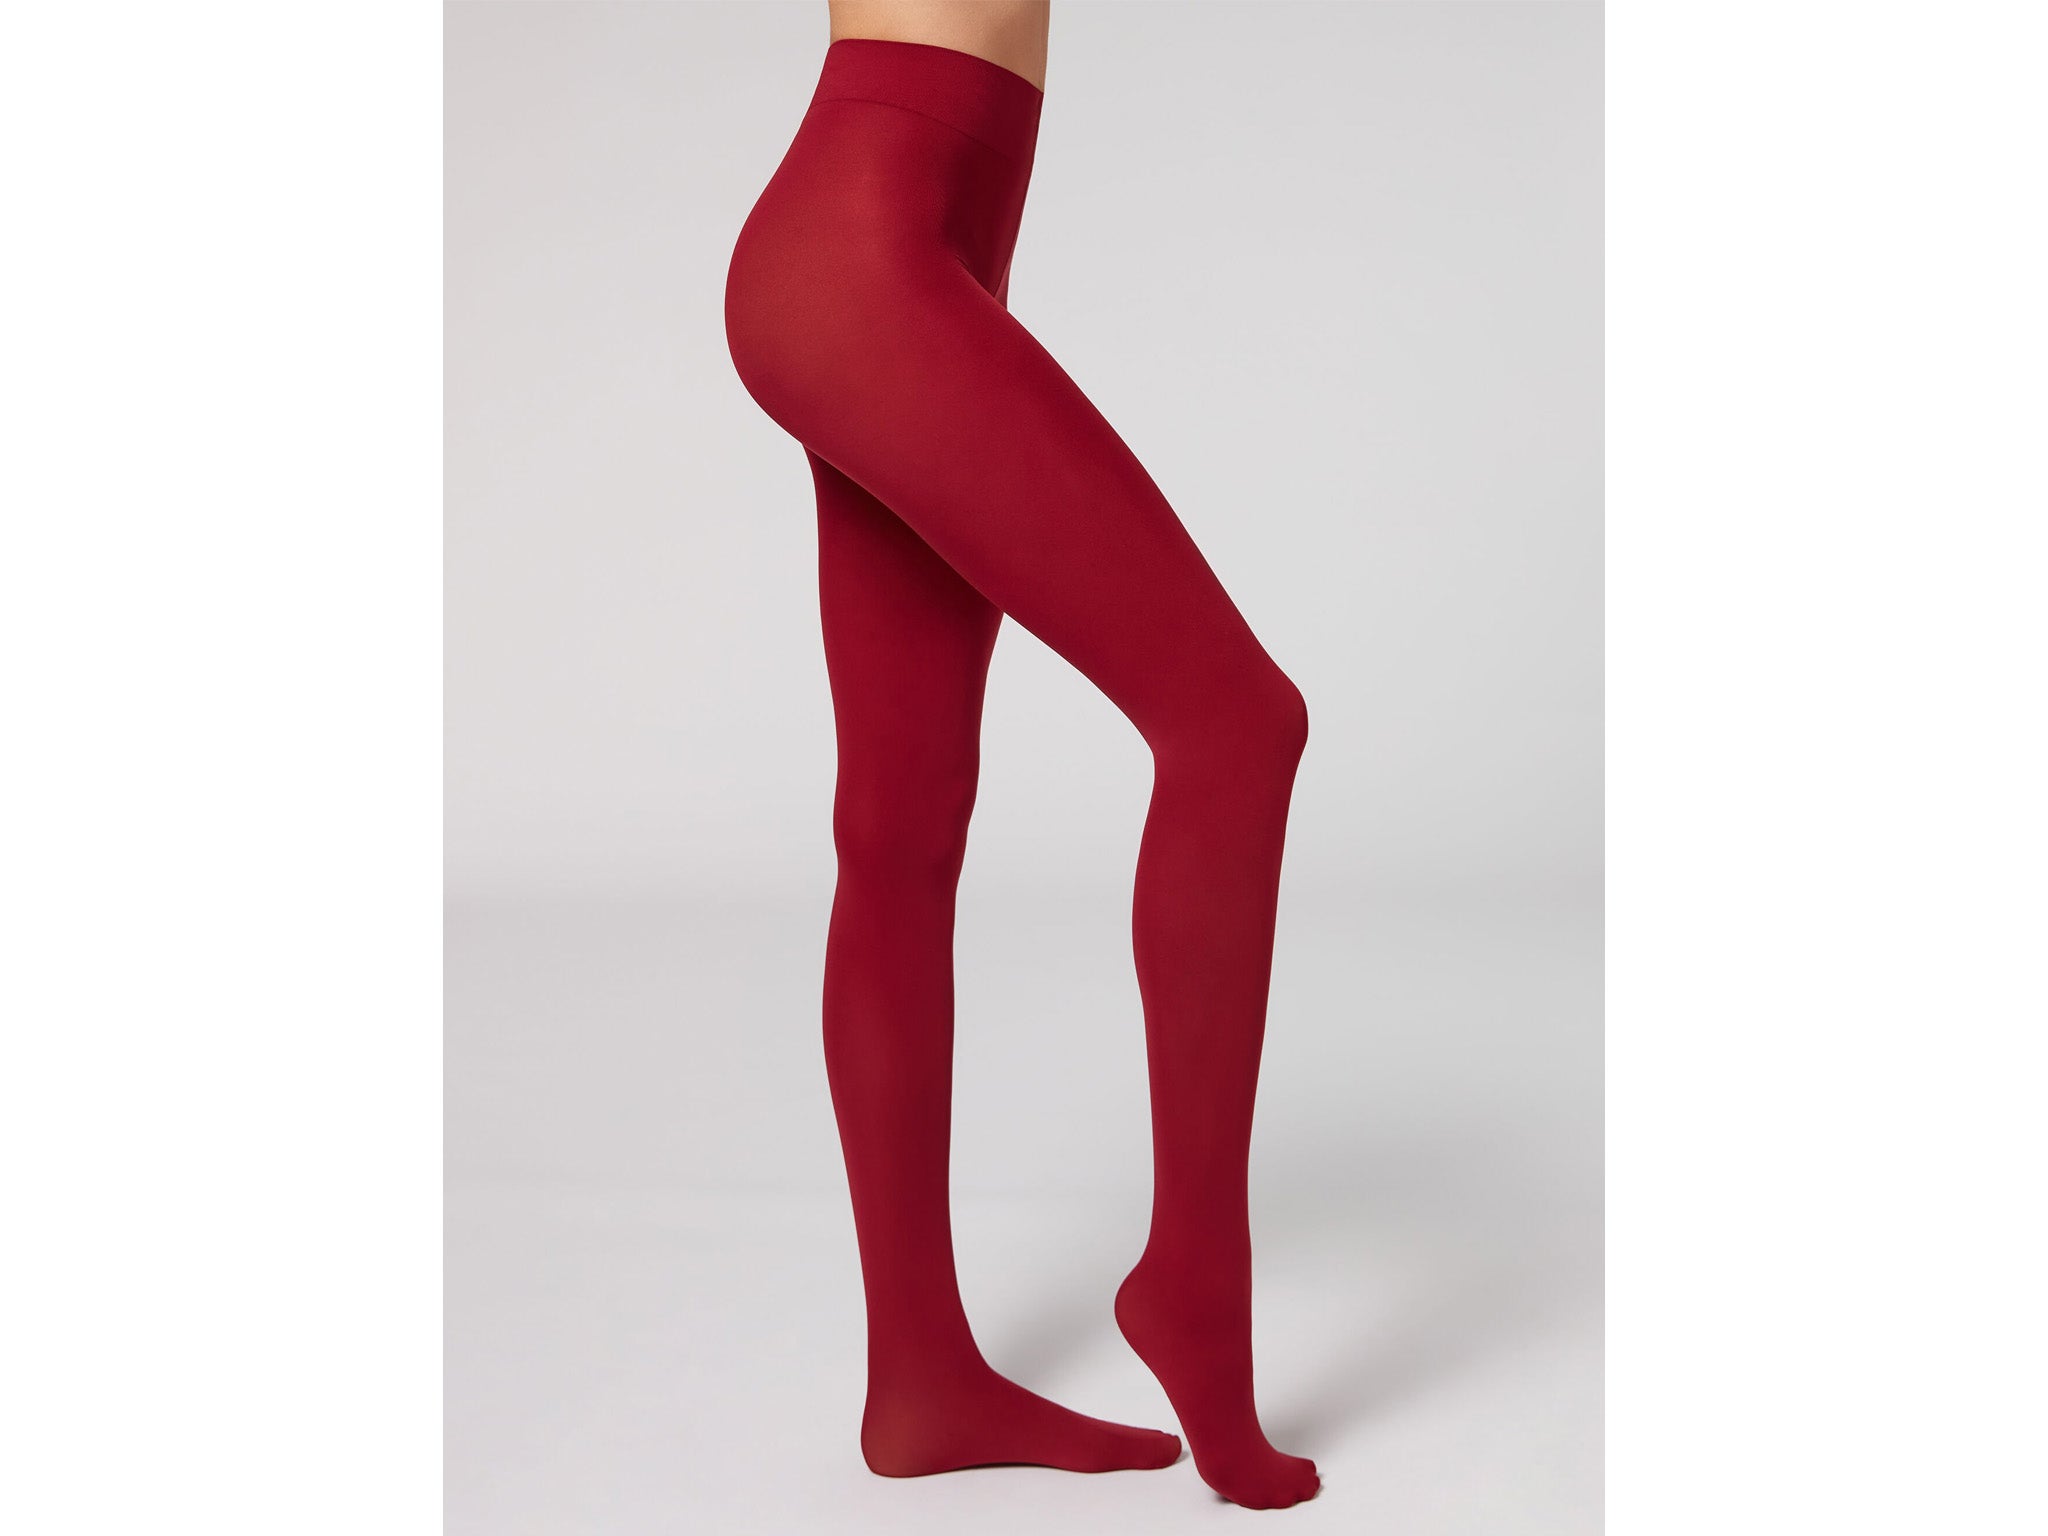 Launching today! The world's first ladder resistant tights